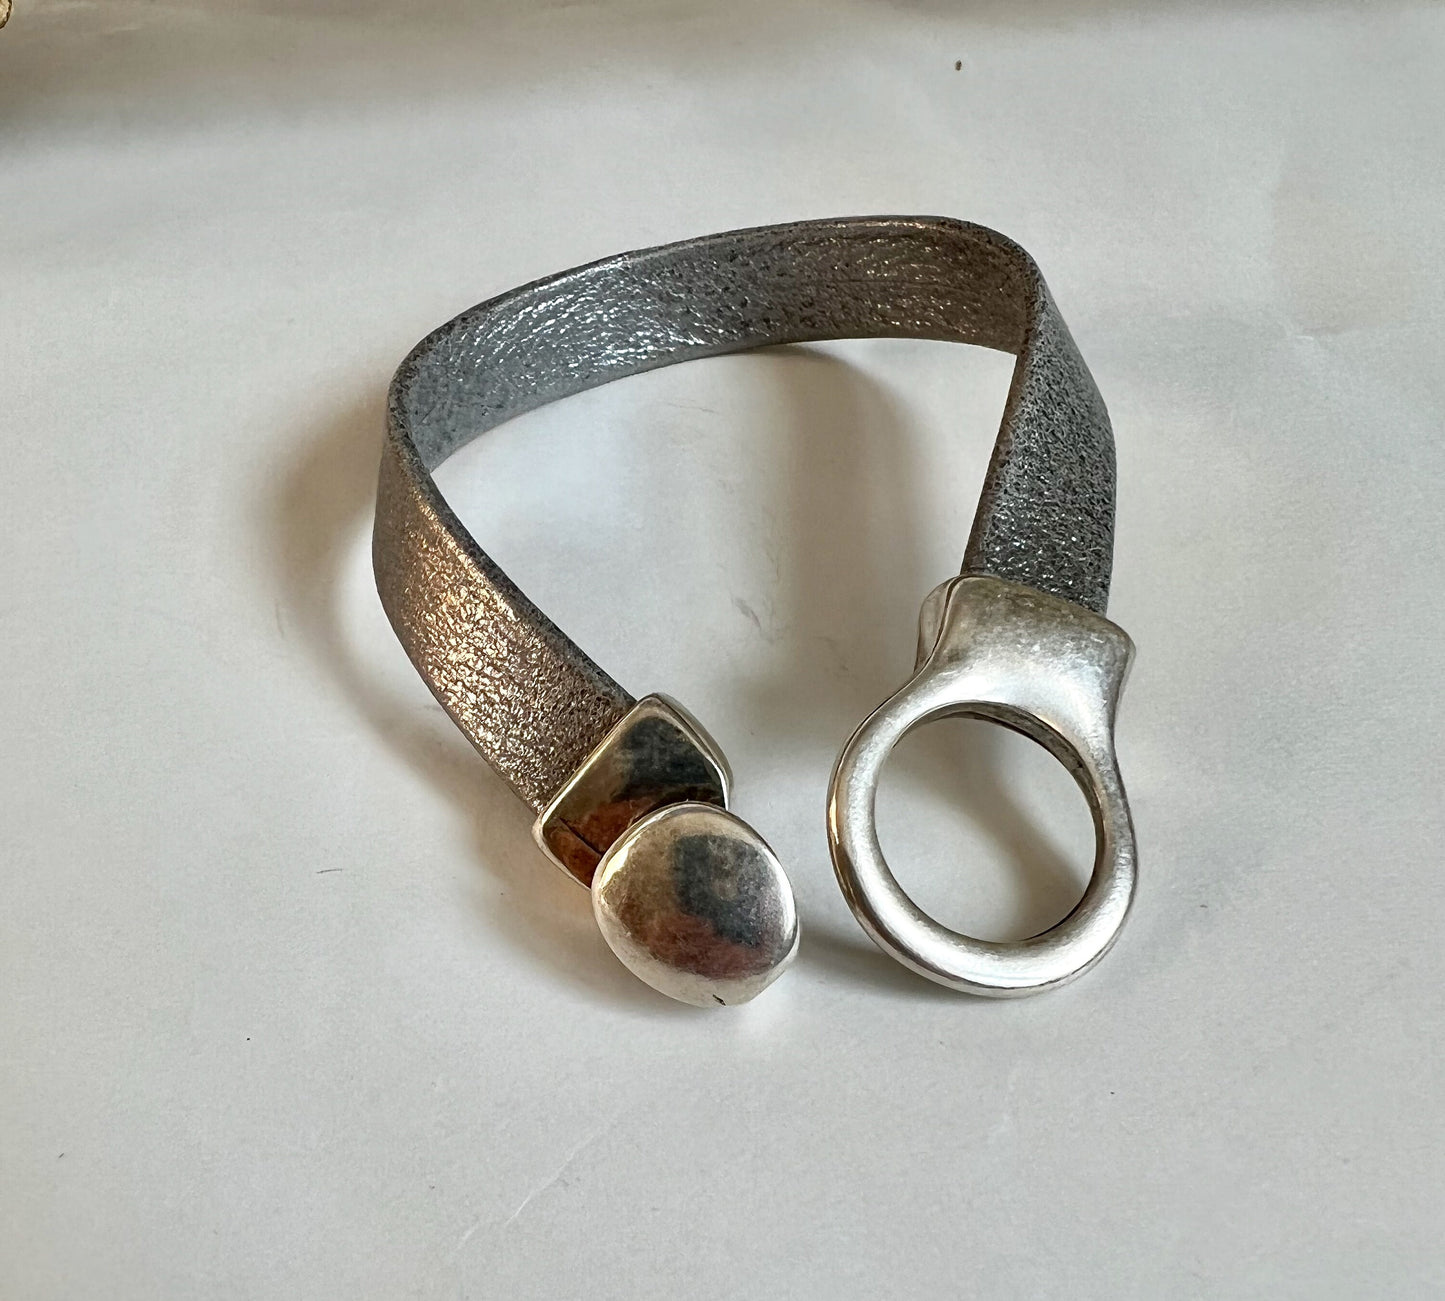 Italian rich silver/gray leather bracelet and silver button clasp.  Soft leather and trendy clasp.